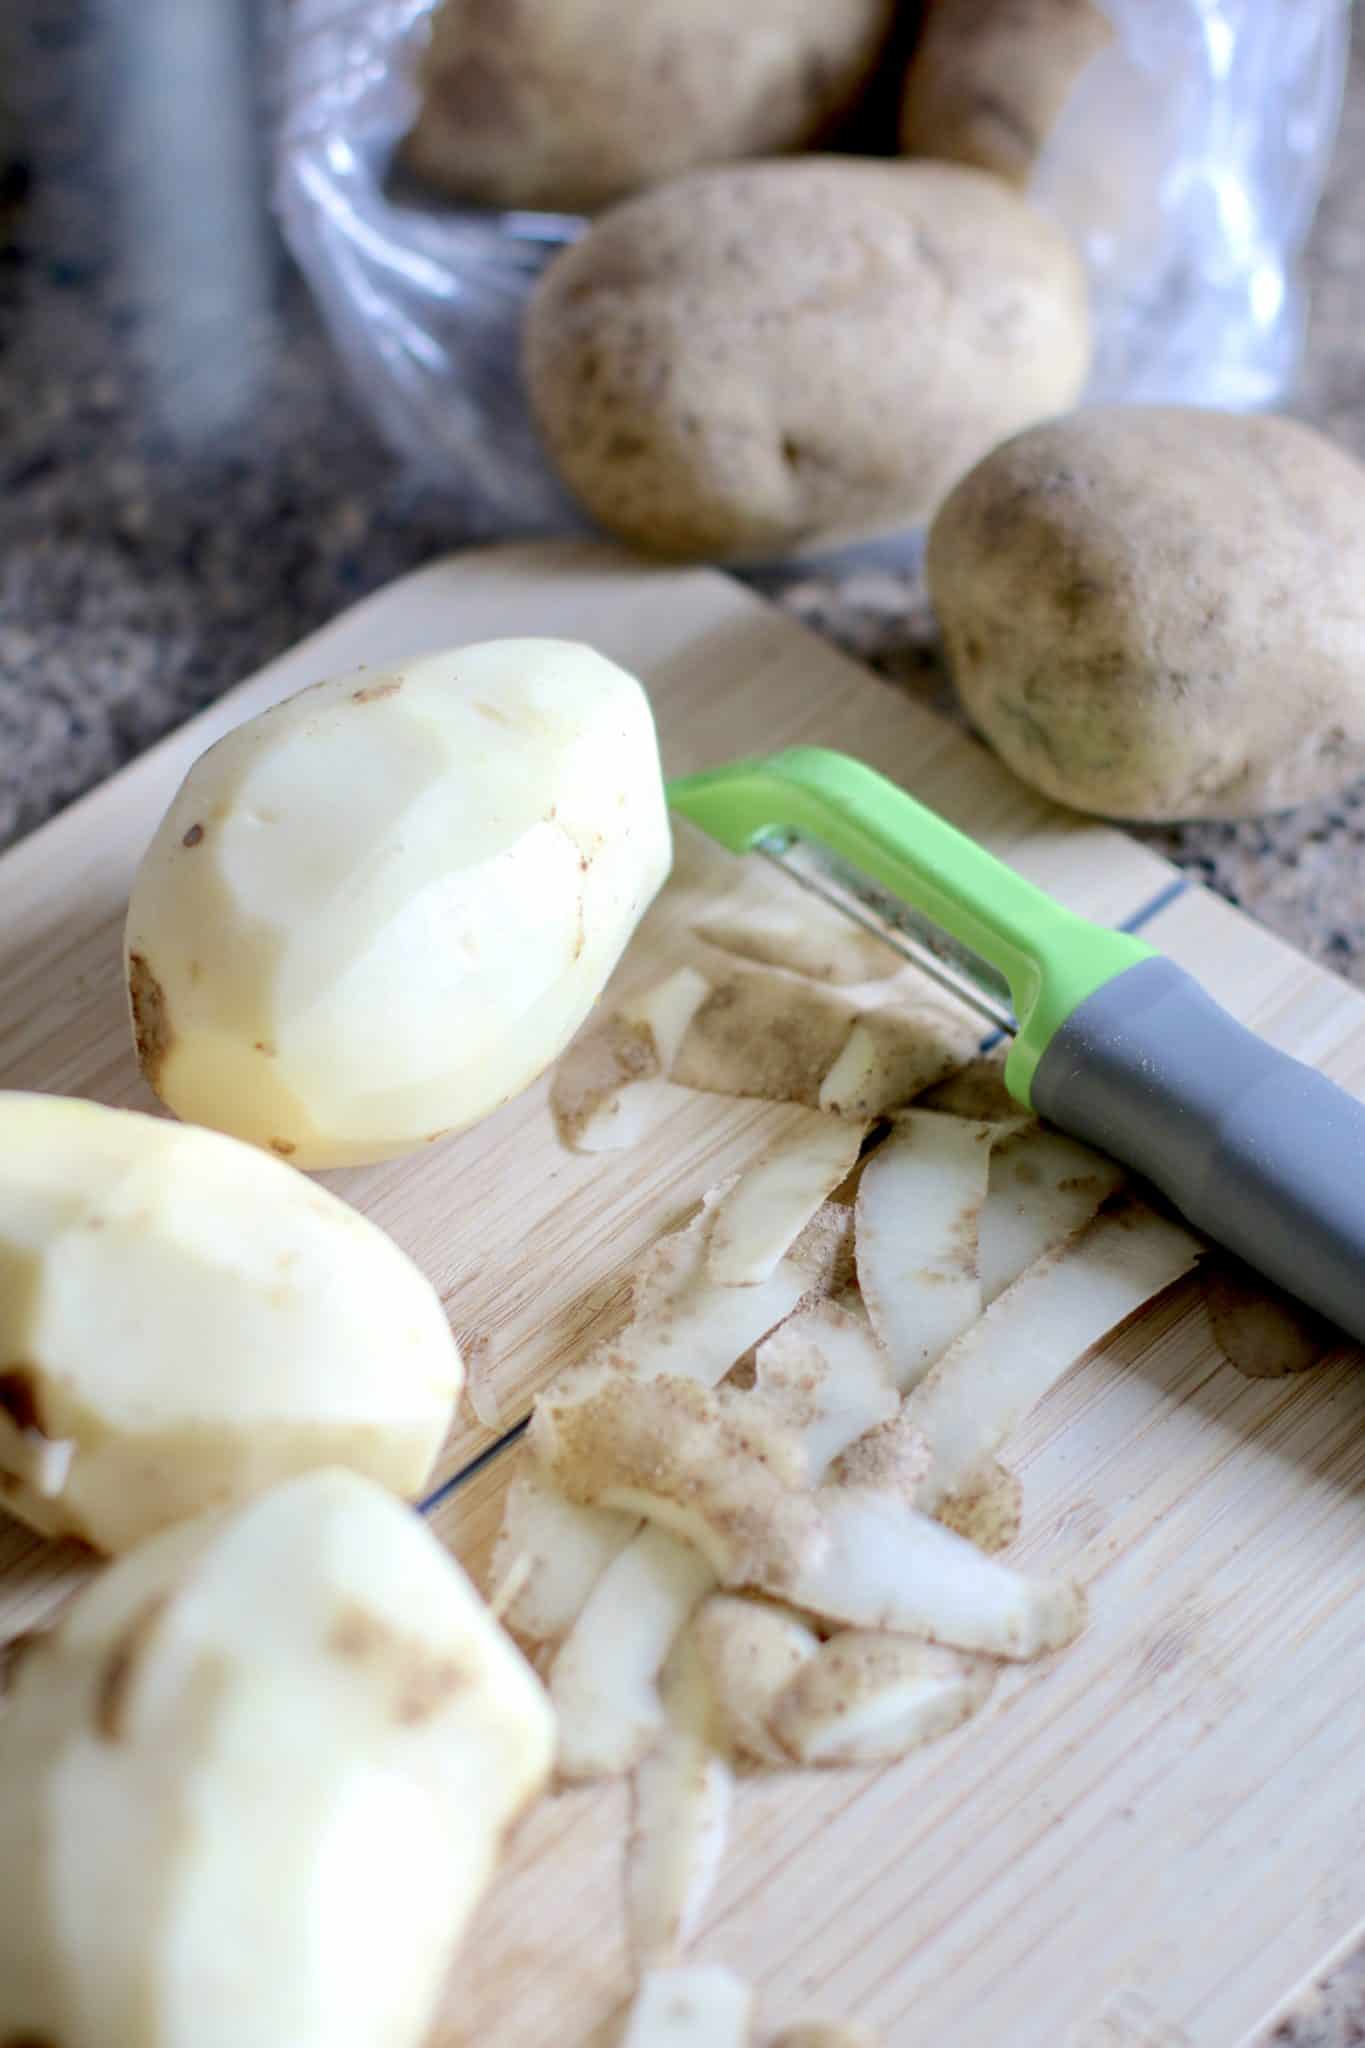 peeled potatoes shown on a wooden cutting board with a potato peeler.